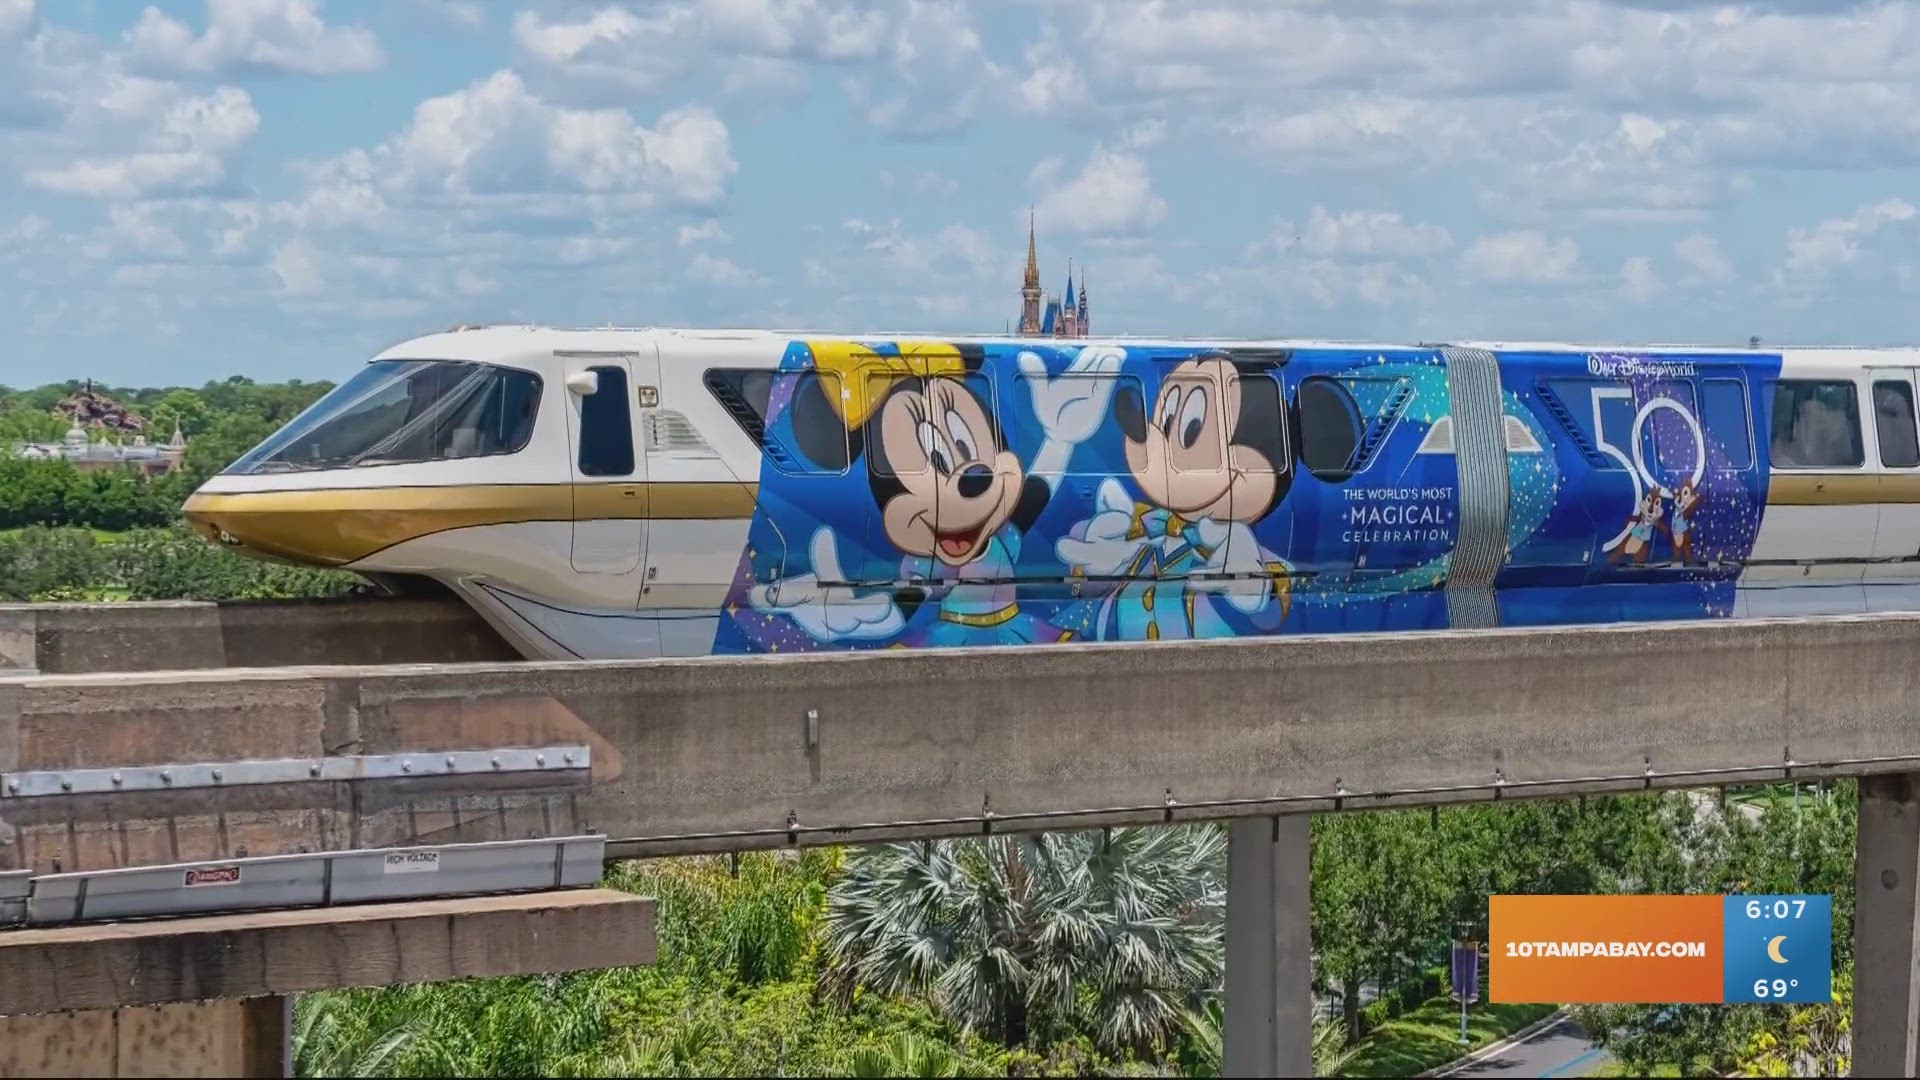 The Disney monorail system, opened in 1971, covers nearly 15 miles and handles more than 50 million passengers a year, according to the company.